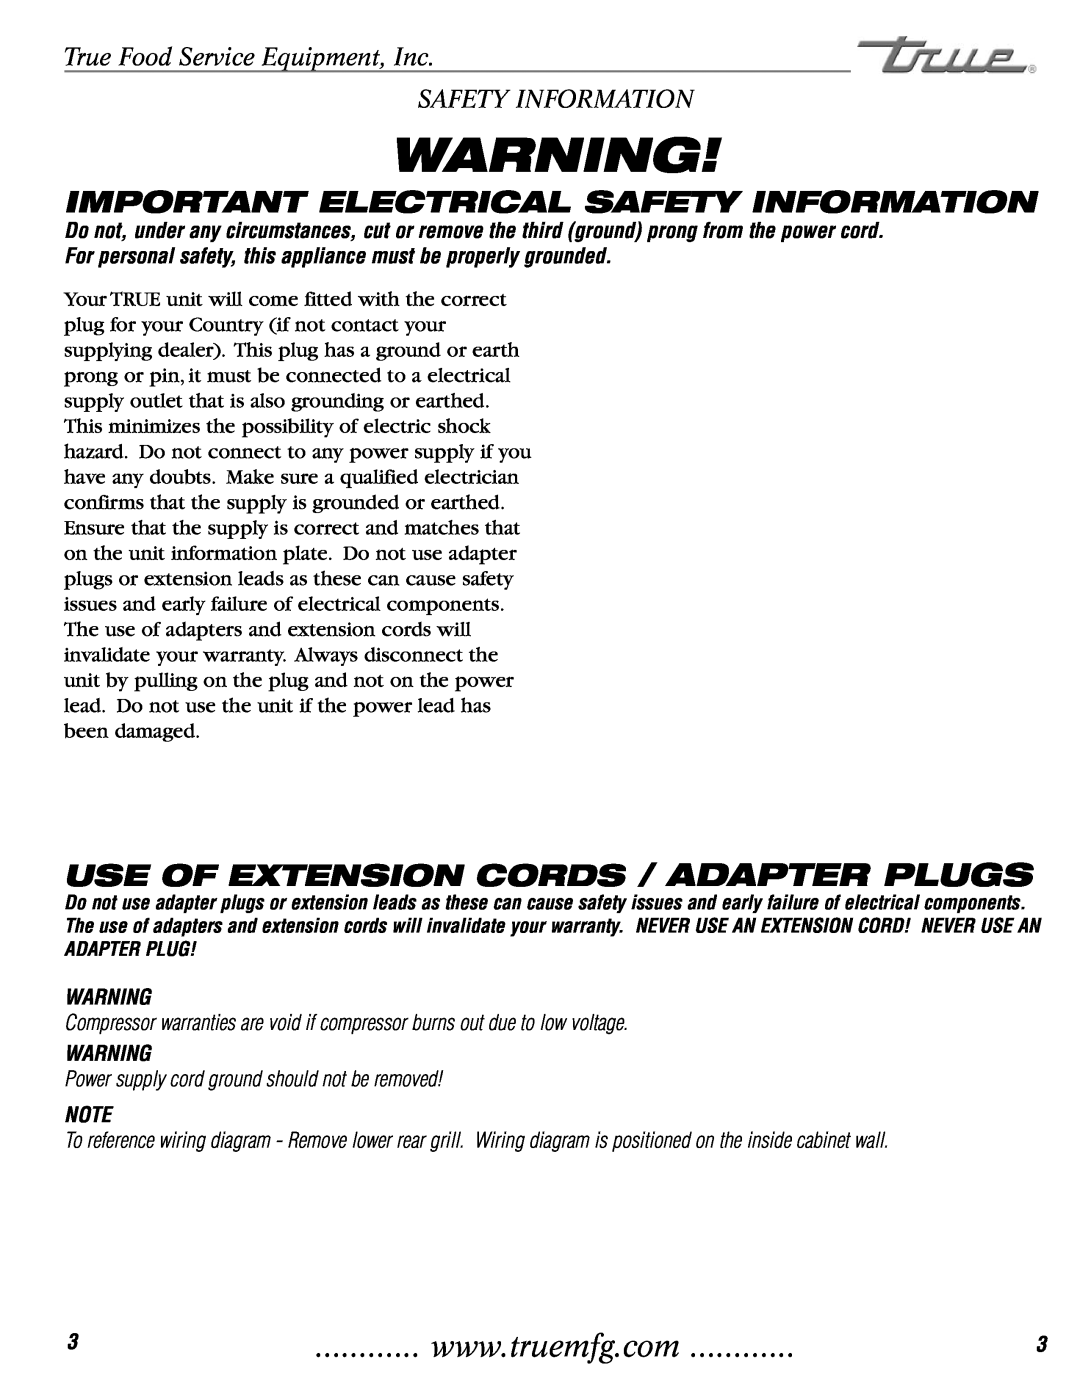 True Manufacturing Company TGU-2, TGU-3F Important Electrical Safety Information, Use Of Extension Cords / Adapter Plugs 